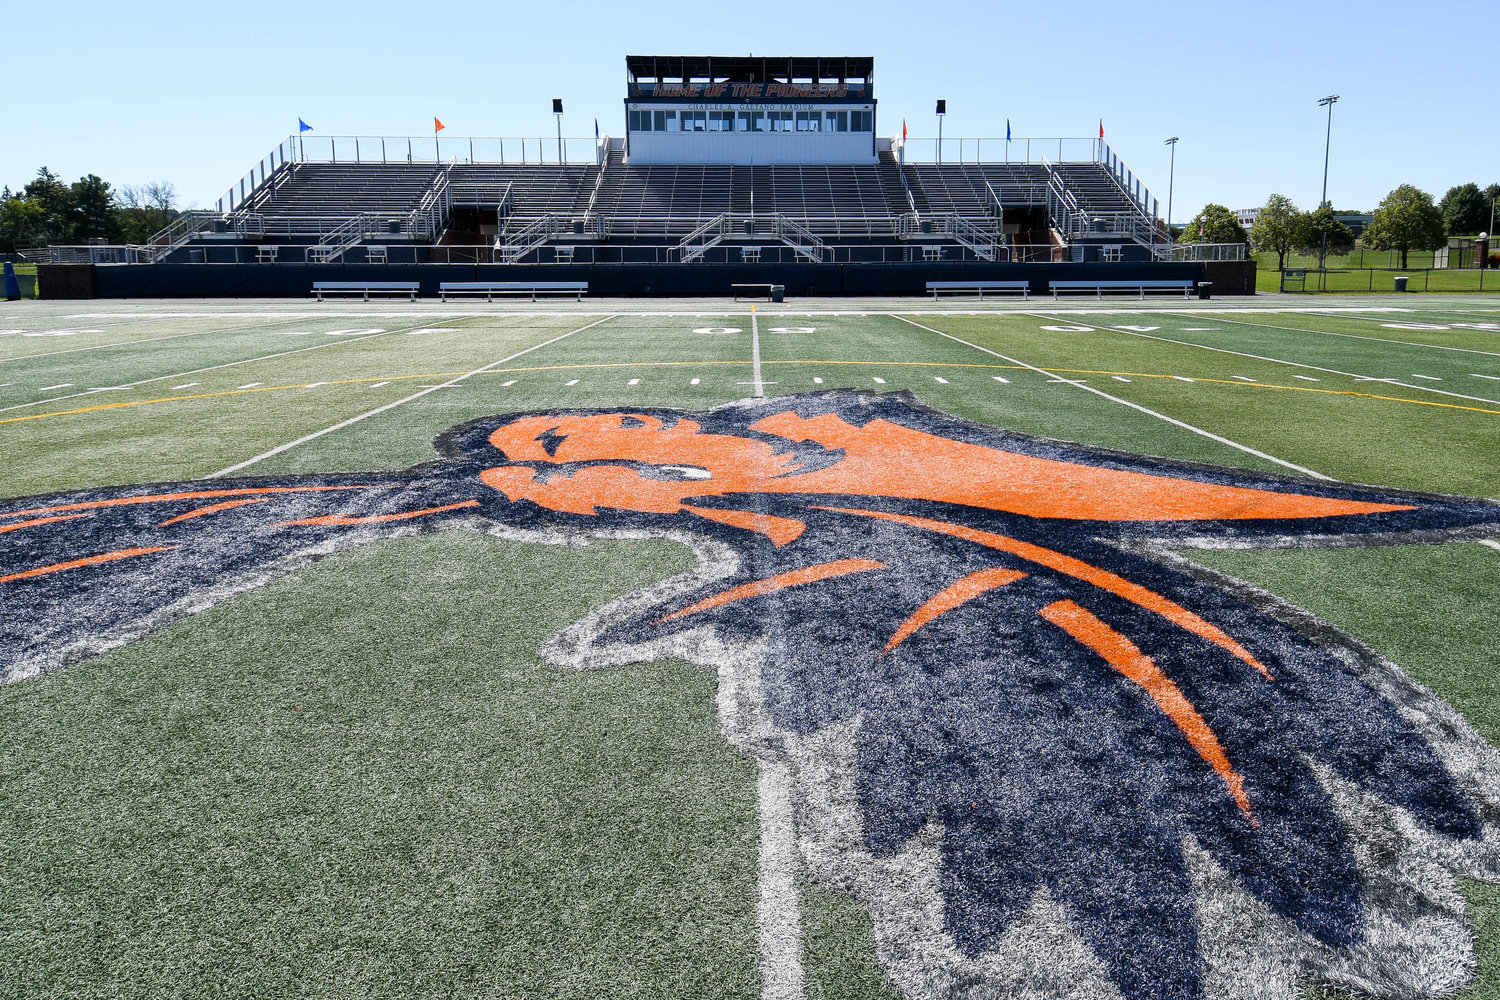 The fifth annual New York State Tool Believe Bowl will kick off tonight at 7 at the Charles A. Gaetano Stadium at Utica University, 1600 Burrstone Road.